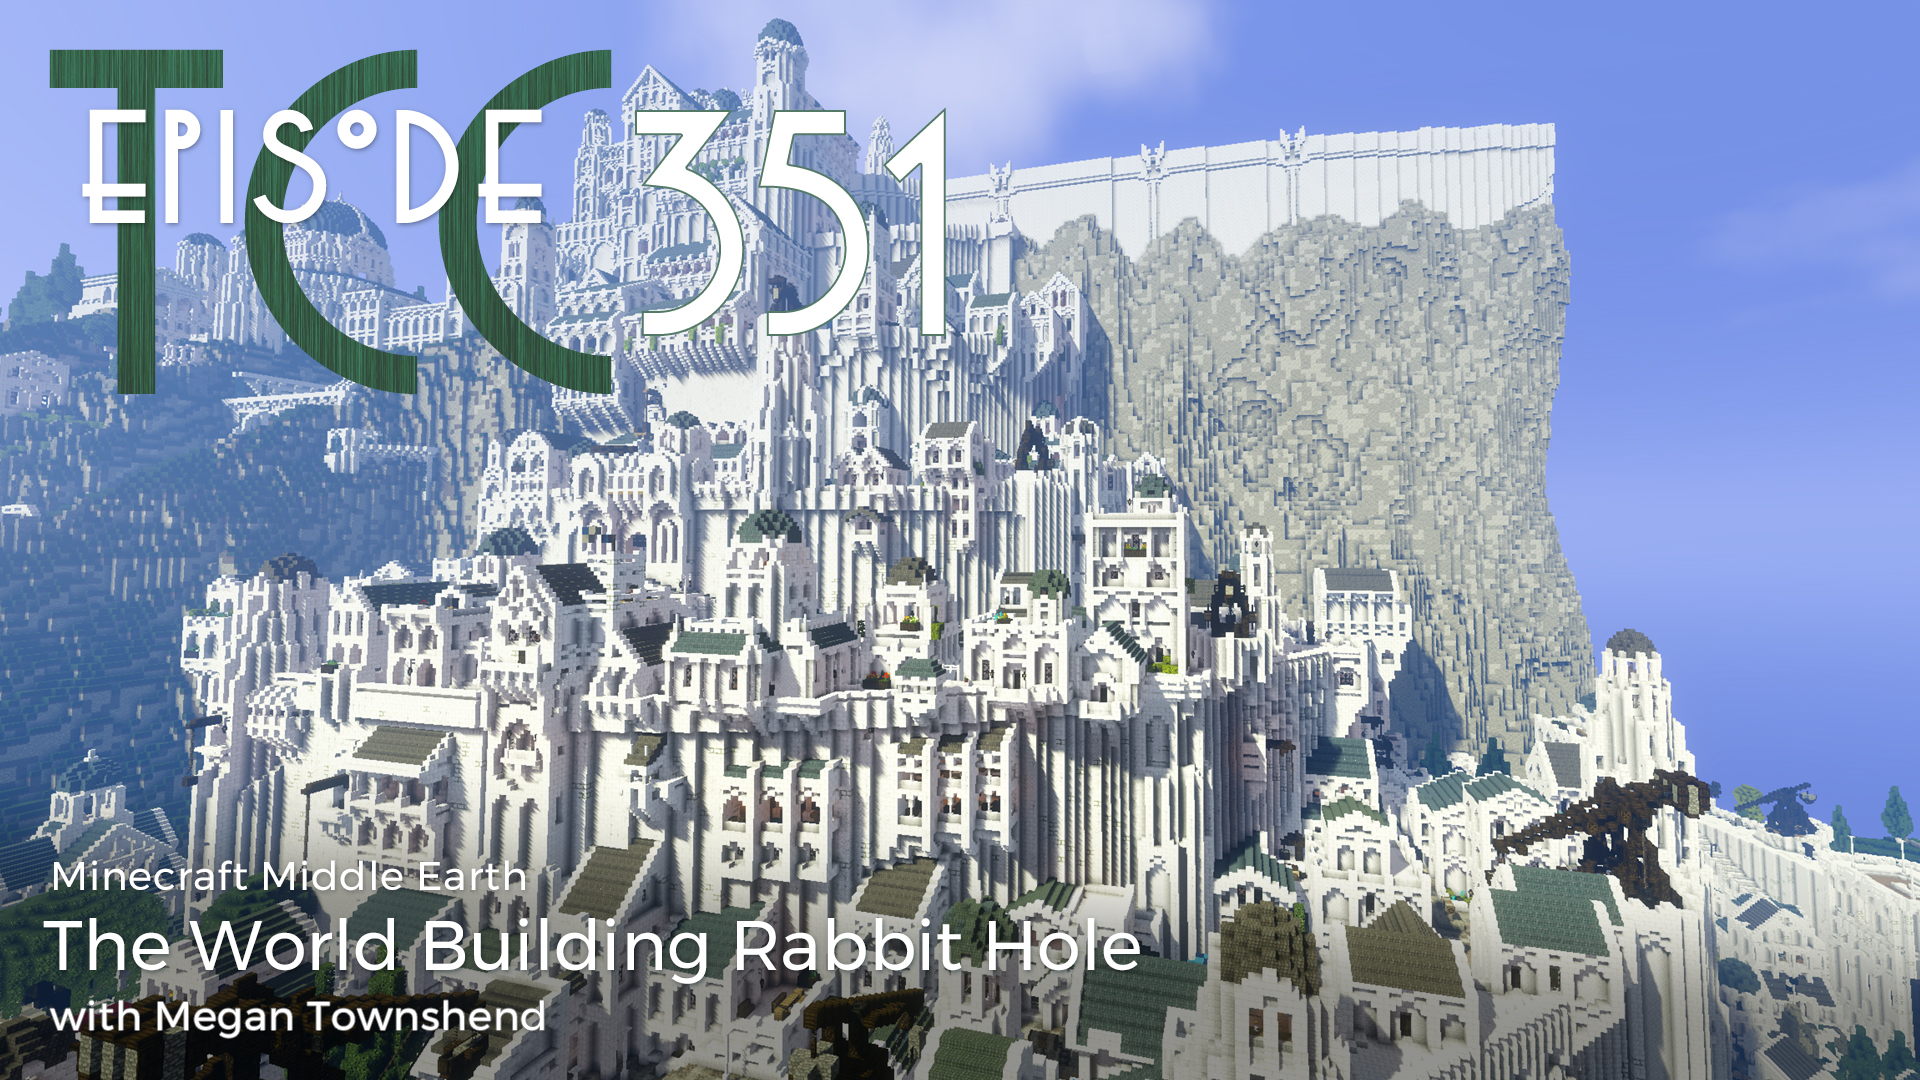 The Citadel Cafe 351: The World Building Rabbit Hole